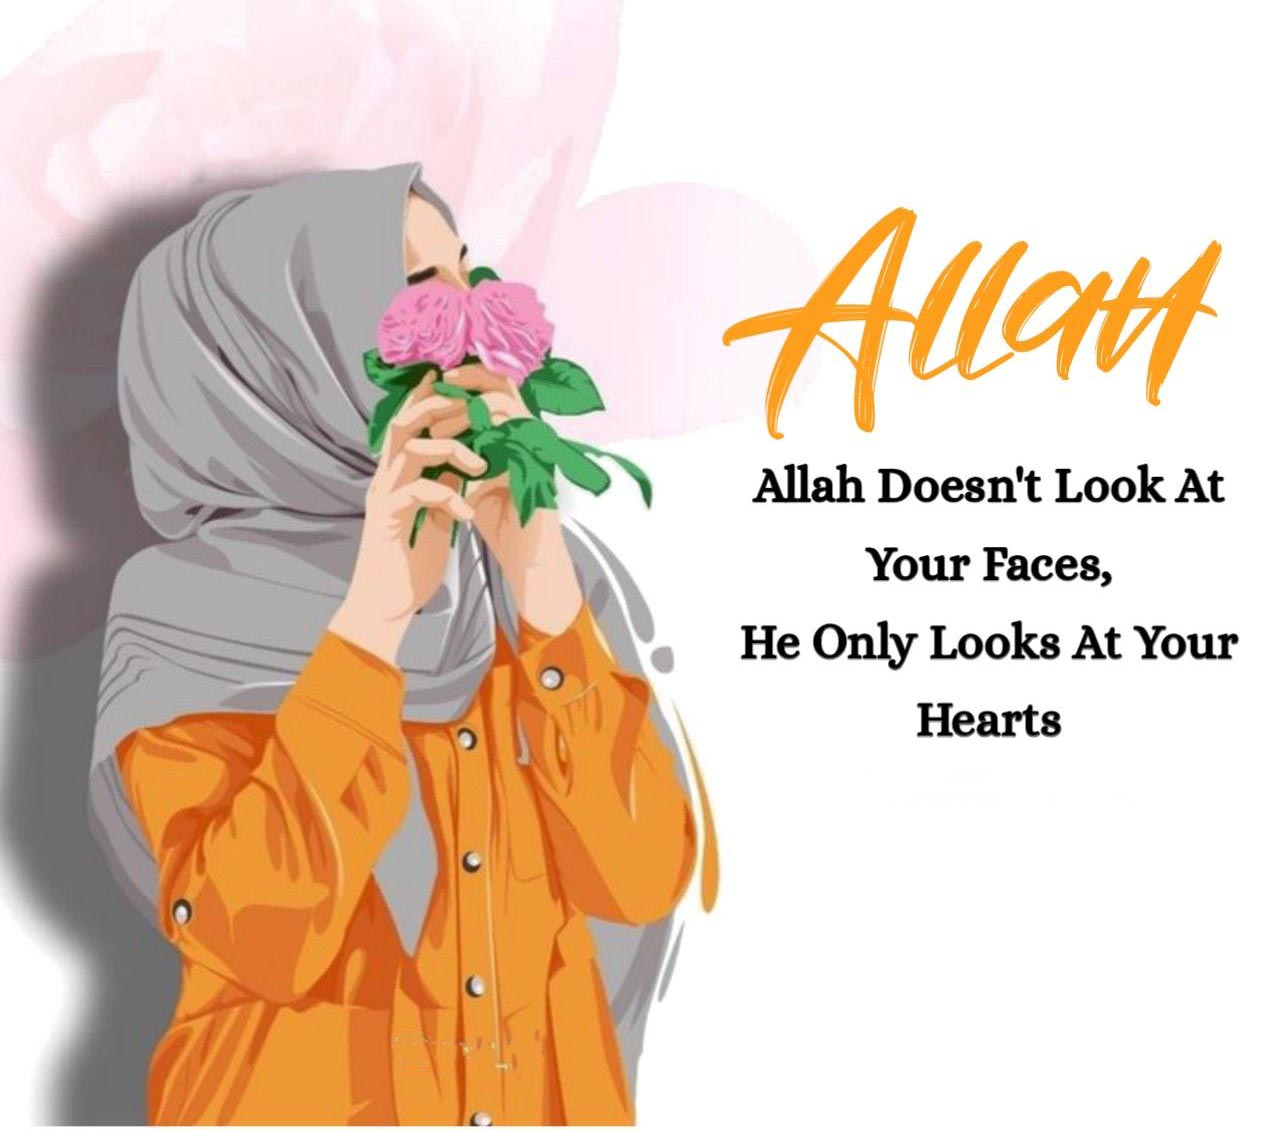 Allah doesnot look at your face He only looks at your herats